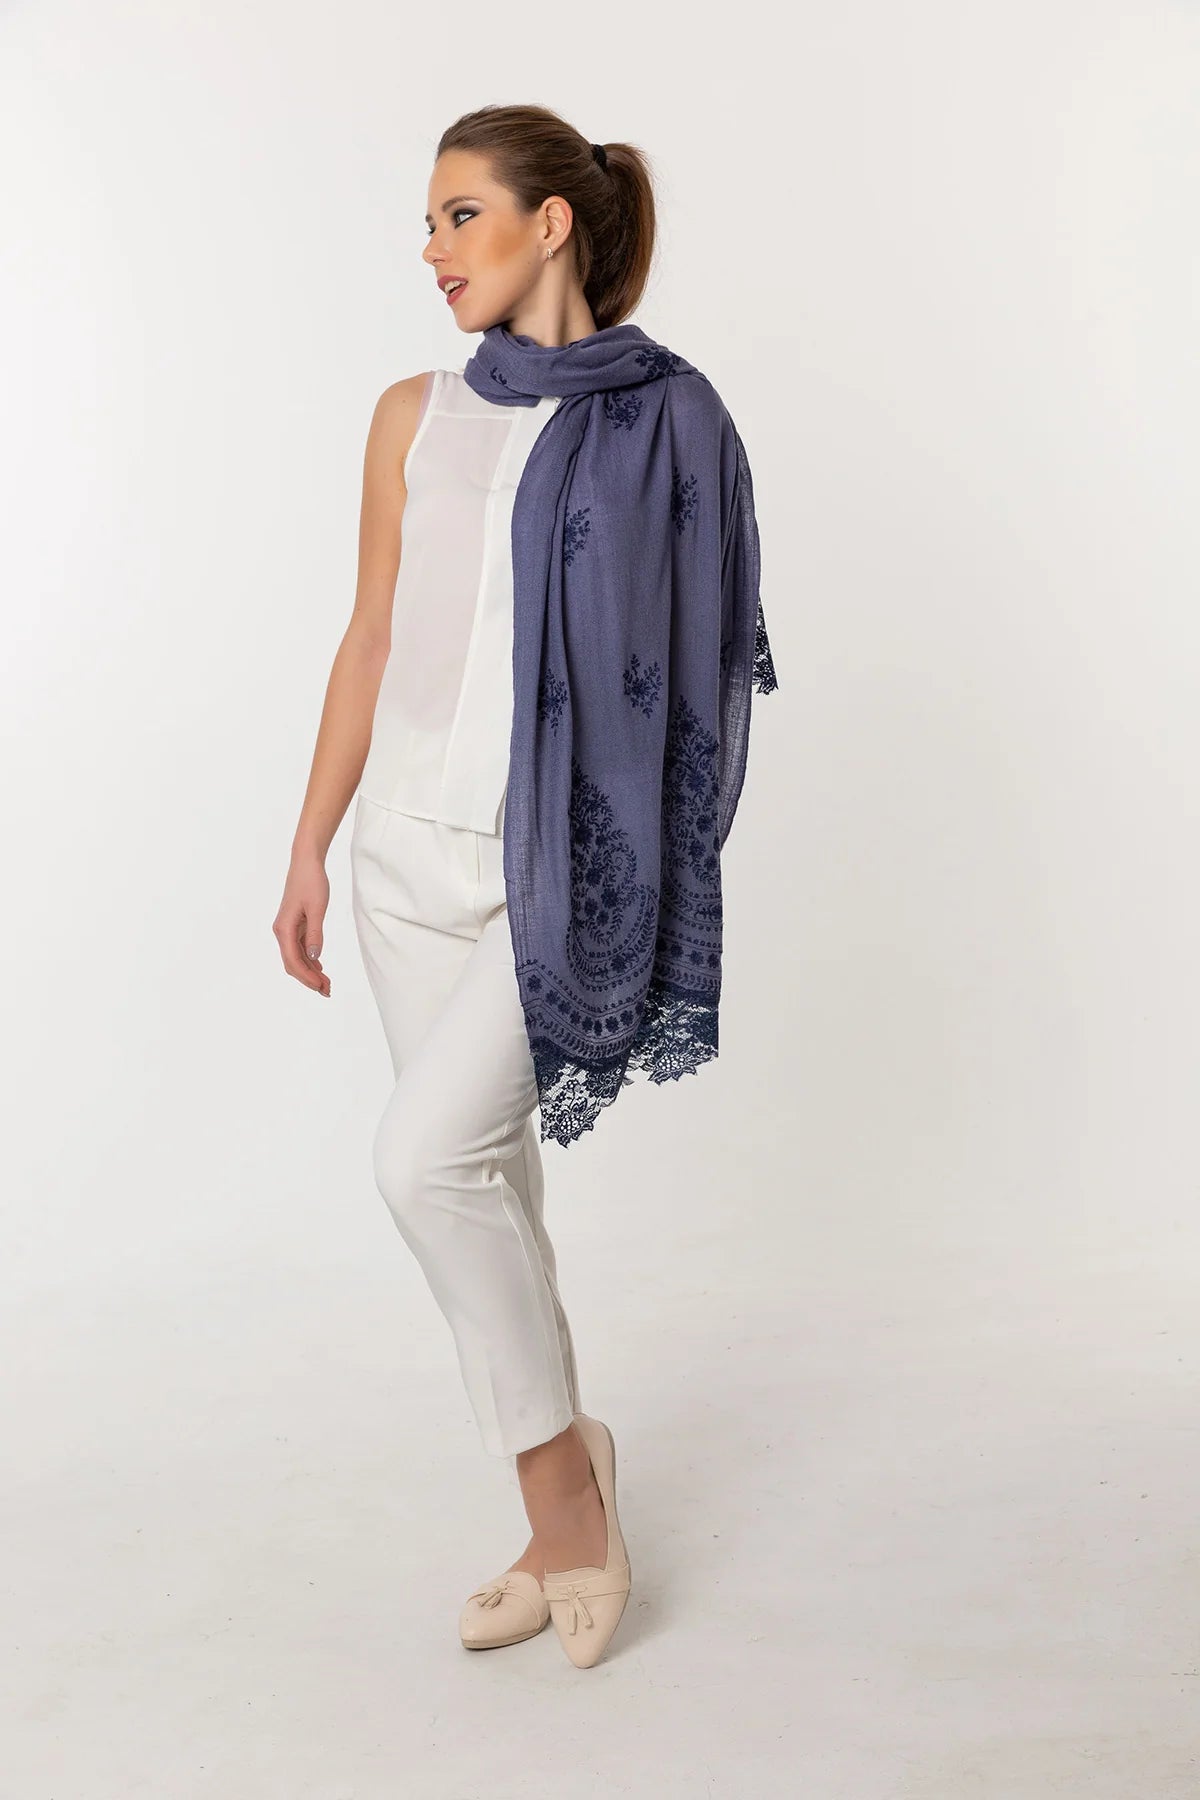 Embroidery Lace Edges Cashmere & Silk - Gray Navy